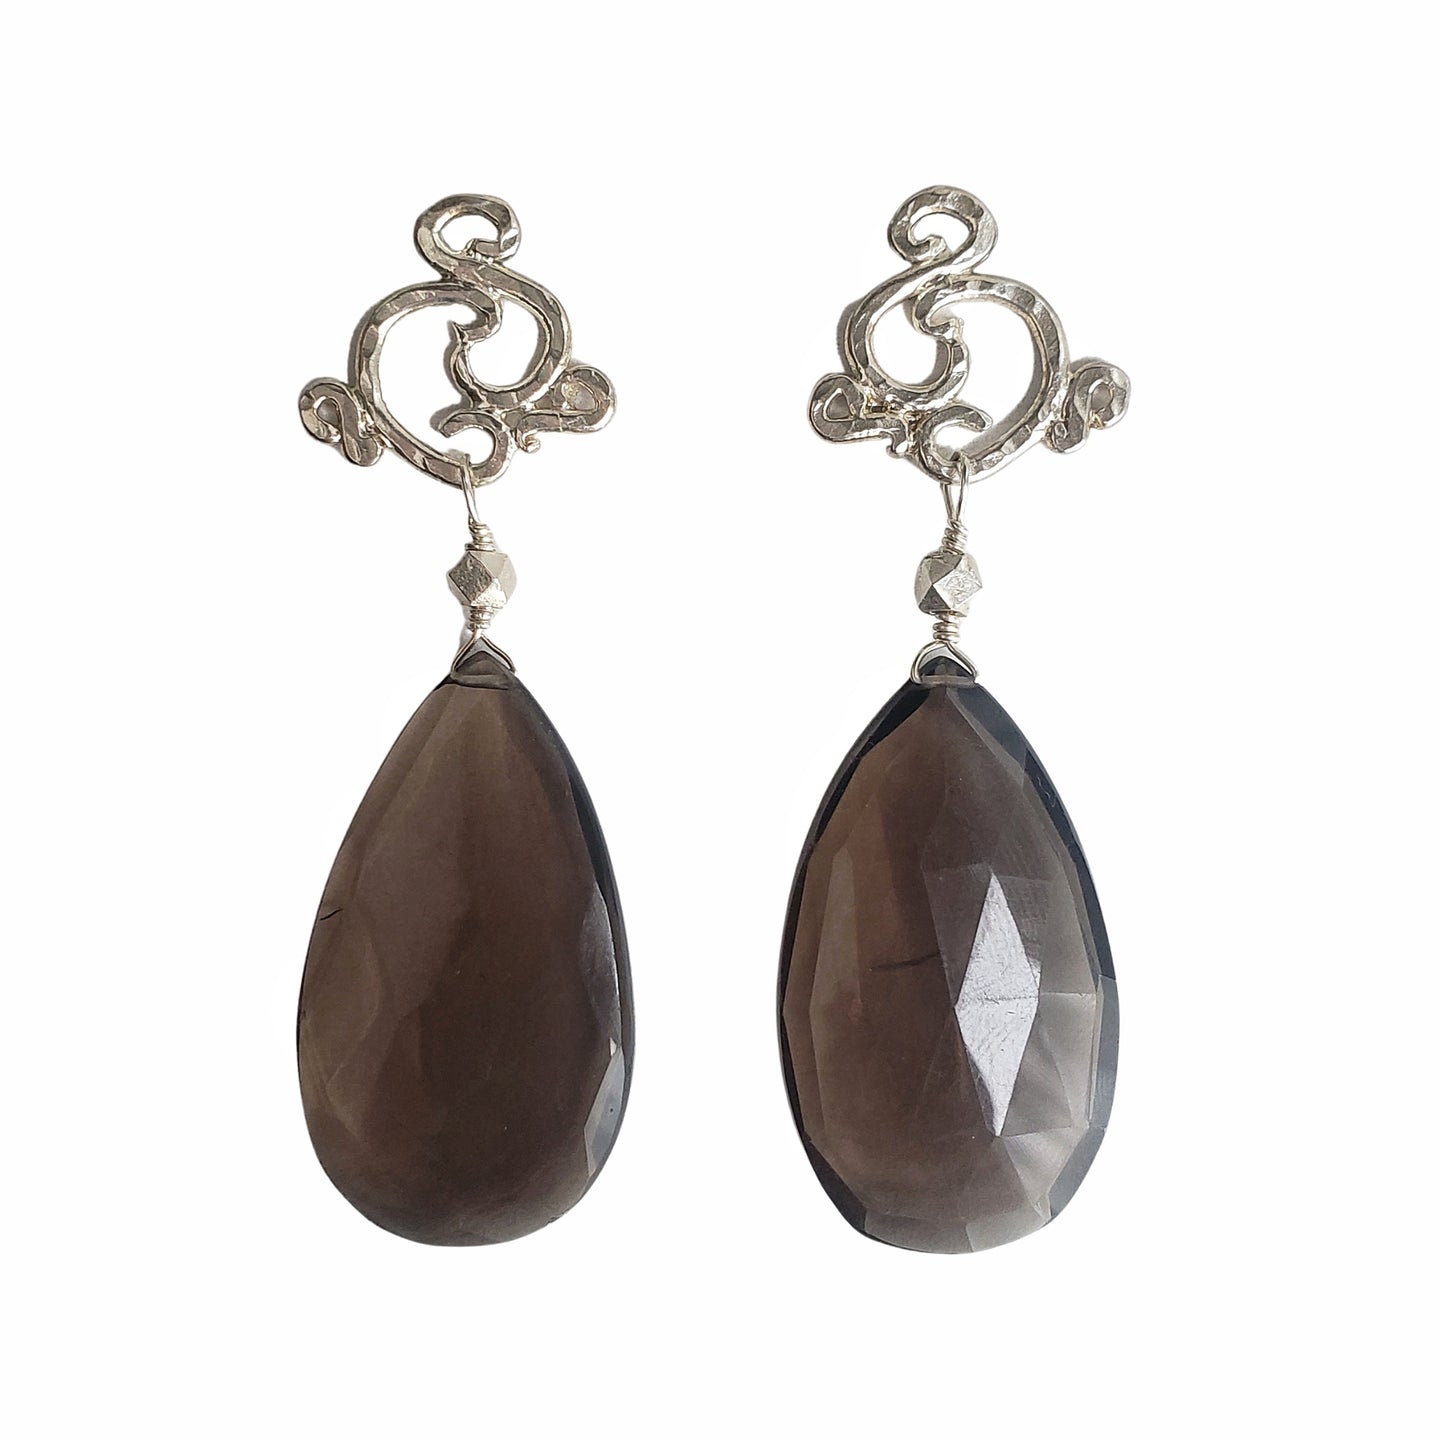 Swirl Post Earrings in Sterling Silver and Smokey Quartz